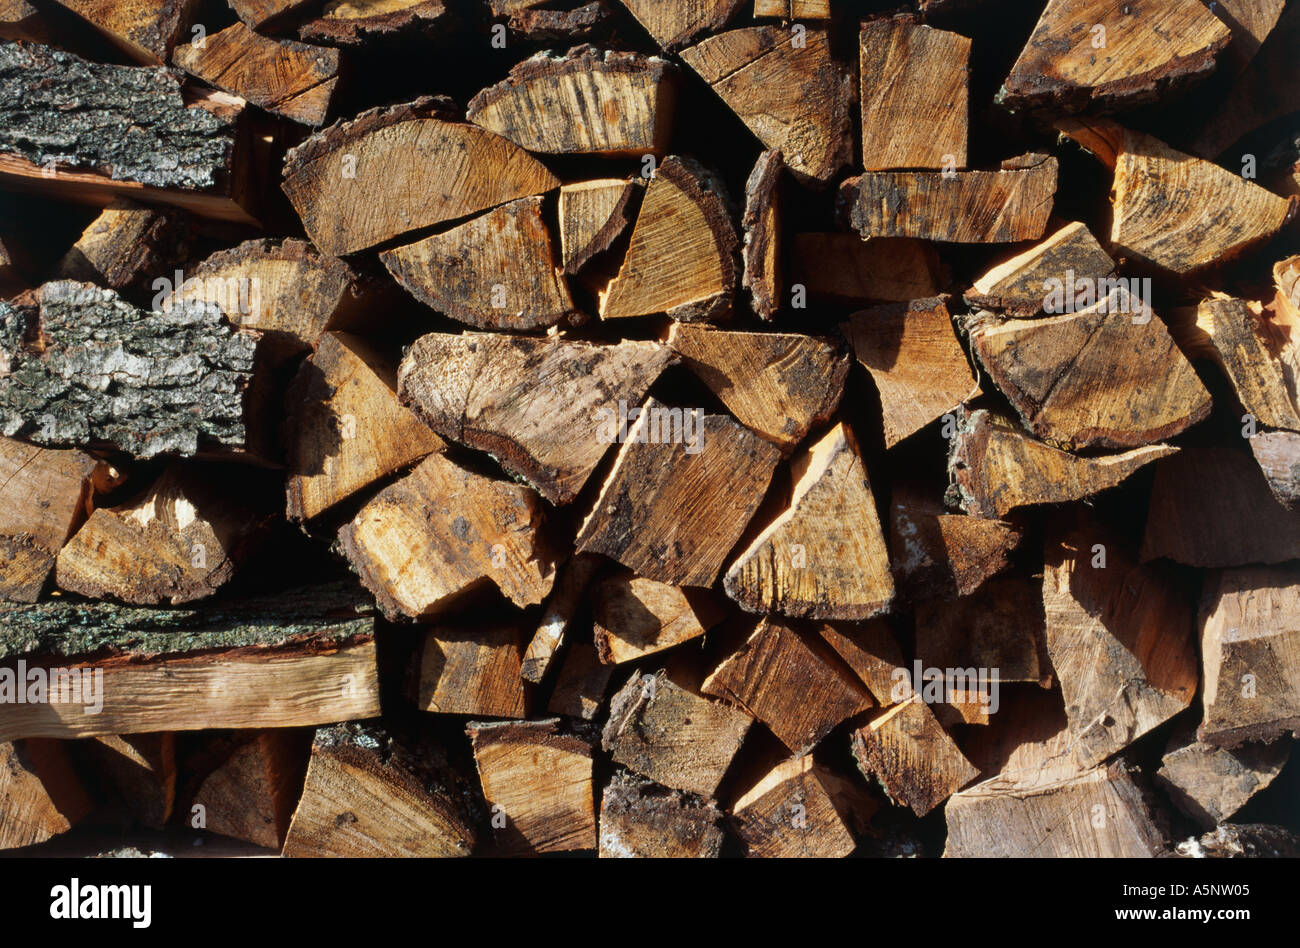 A wood stack Stock Photo